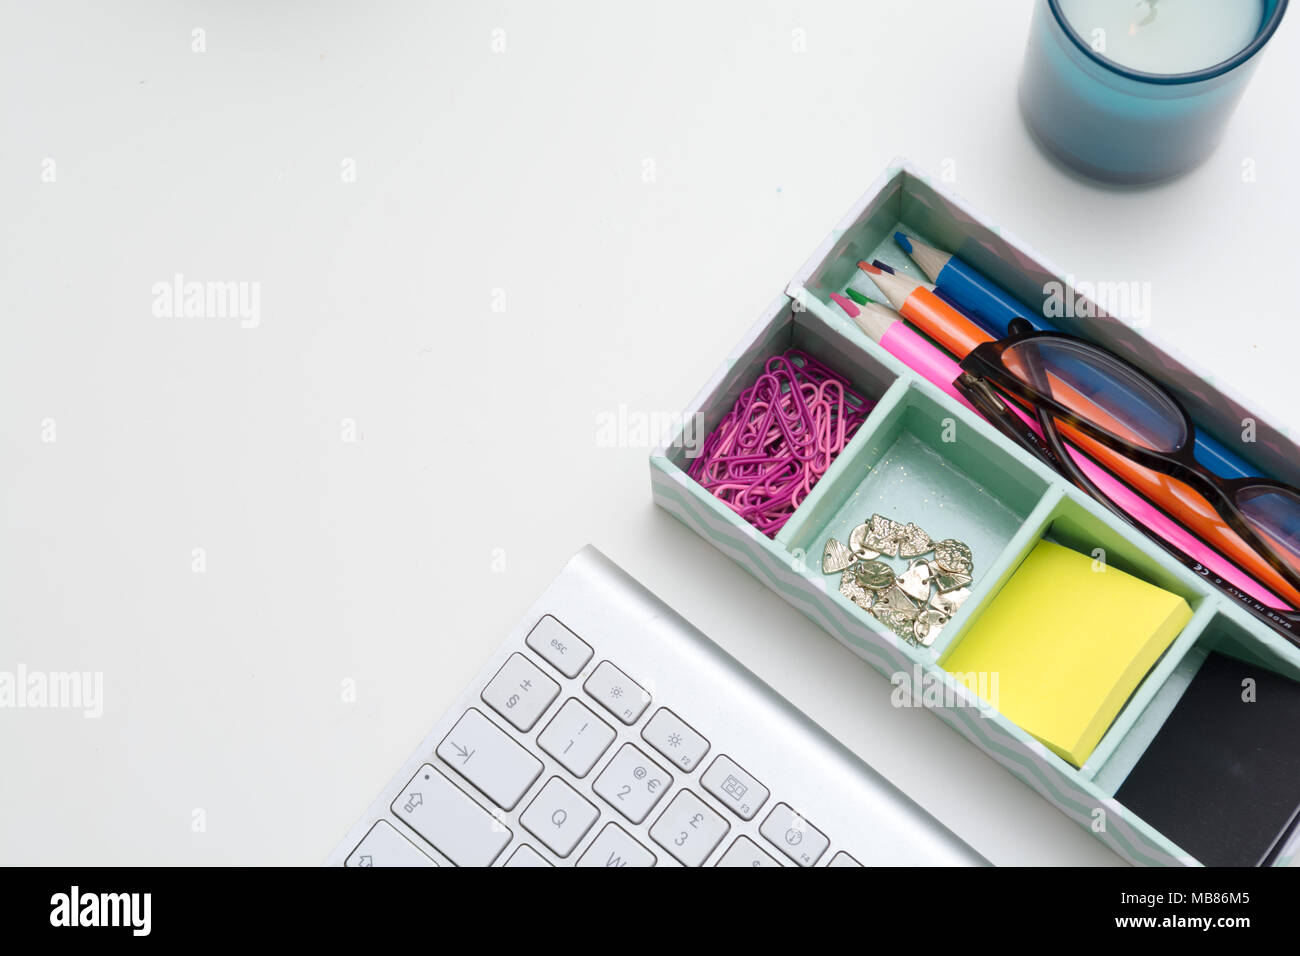 Top view of creative work space on white desk Stock Photo